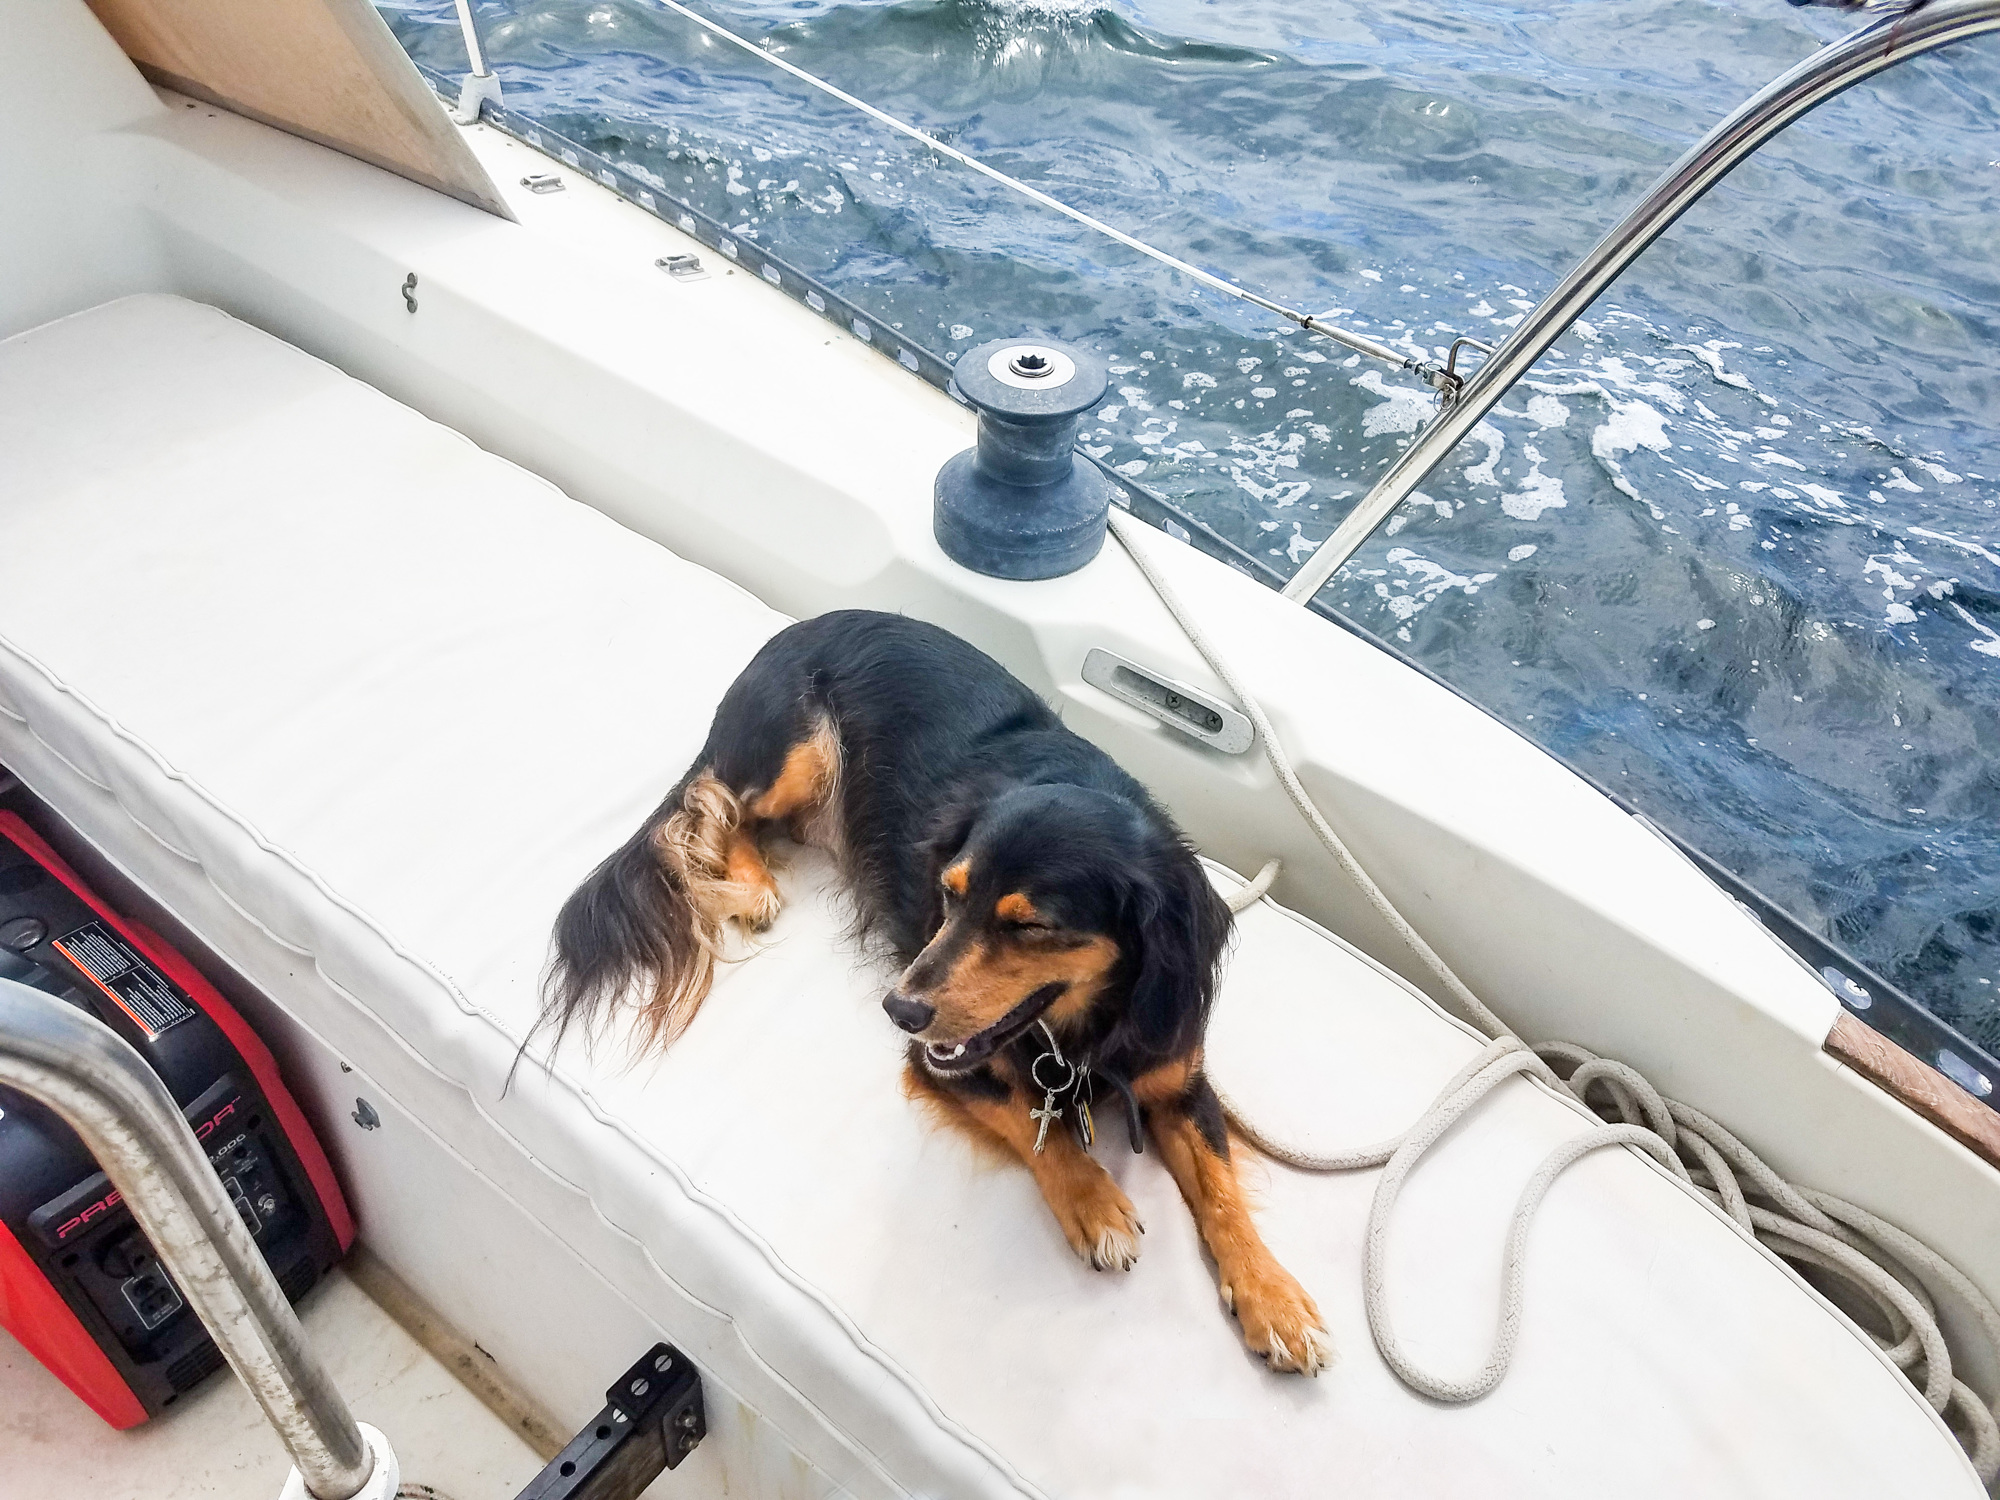 Harley, a five-year-old dachshund mix, swam several miles back onto shore after falling off a boat during a storm.